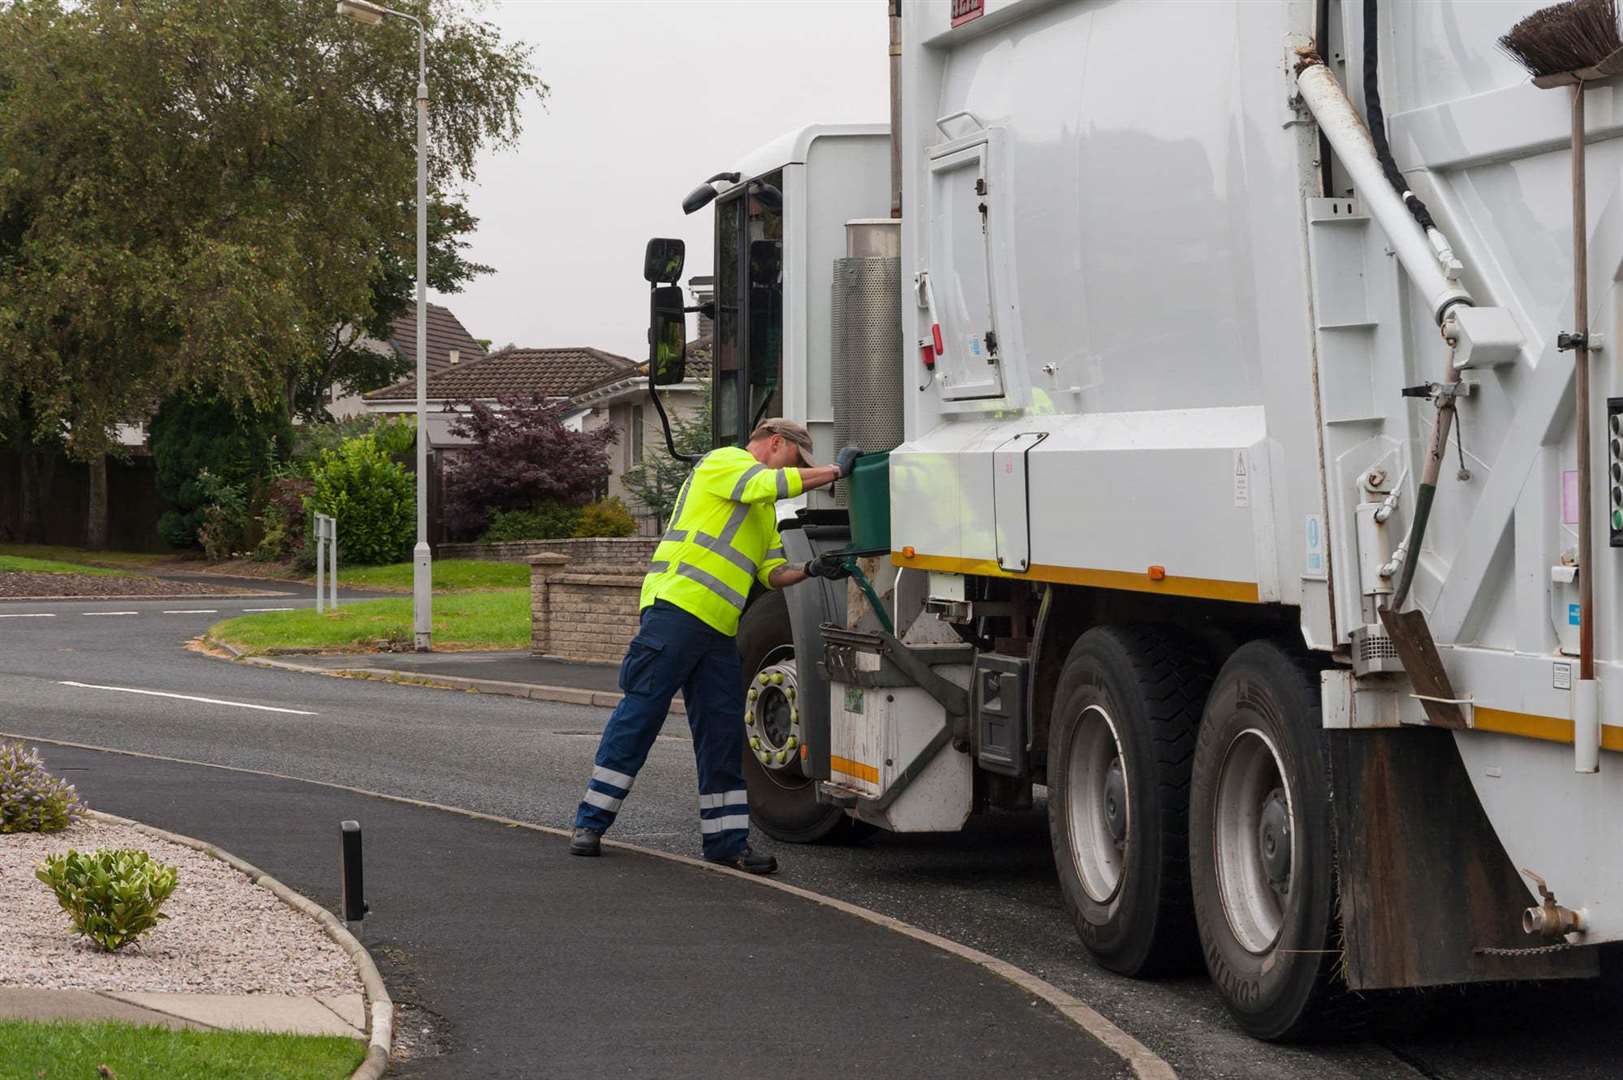 Waste collections have been severly affected by staff shortages